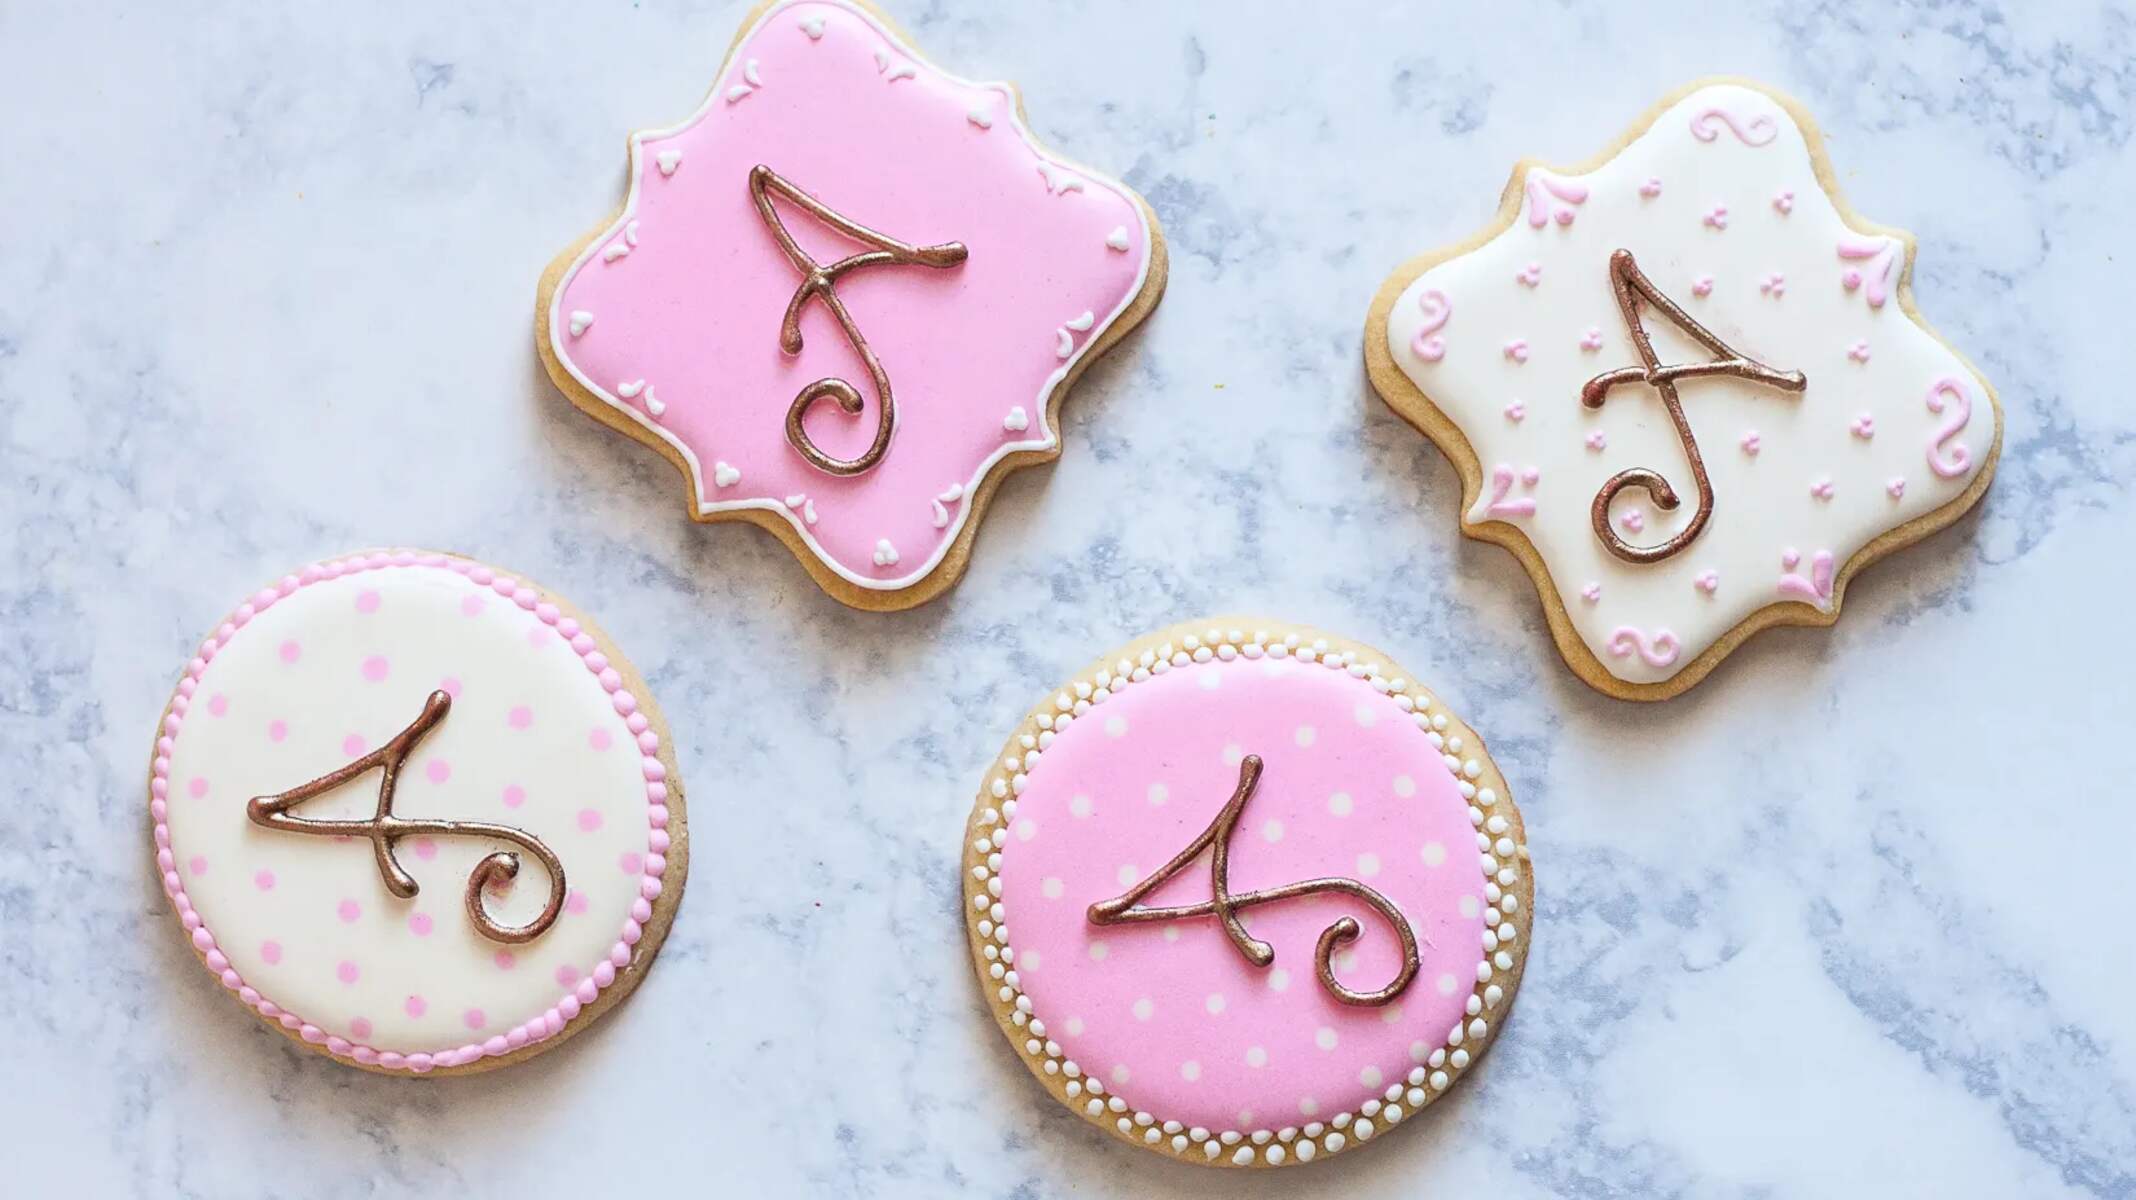 How To Write On Cookies Without Projector